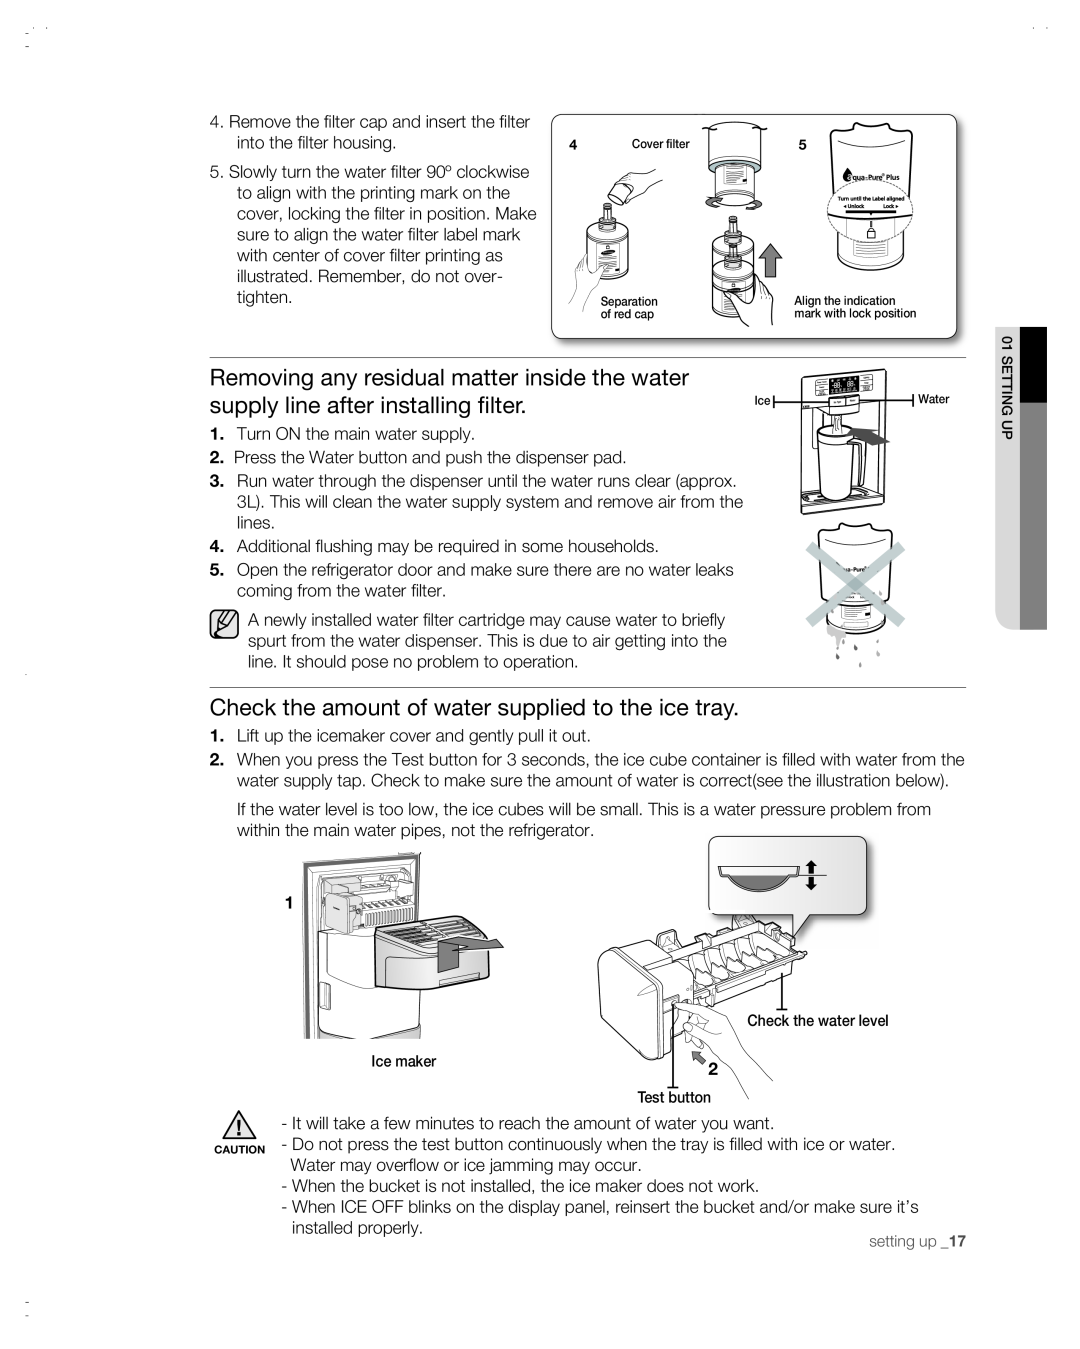 Samsung RSG257AABP user manual Removing any residual matter inside the water, supply line after installing filter 